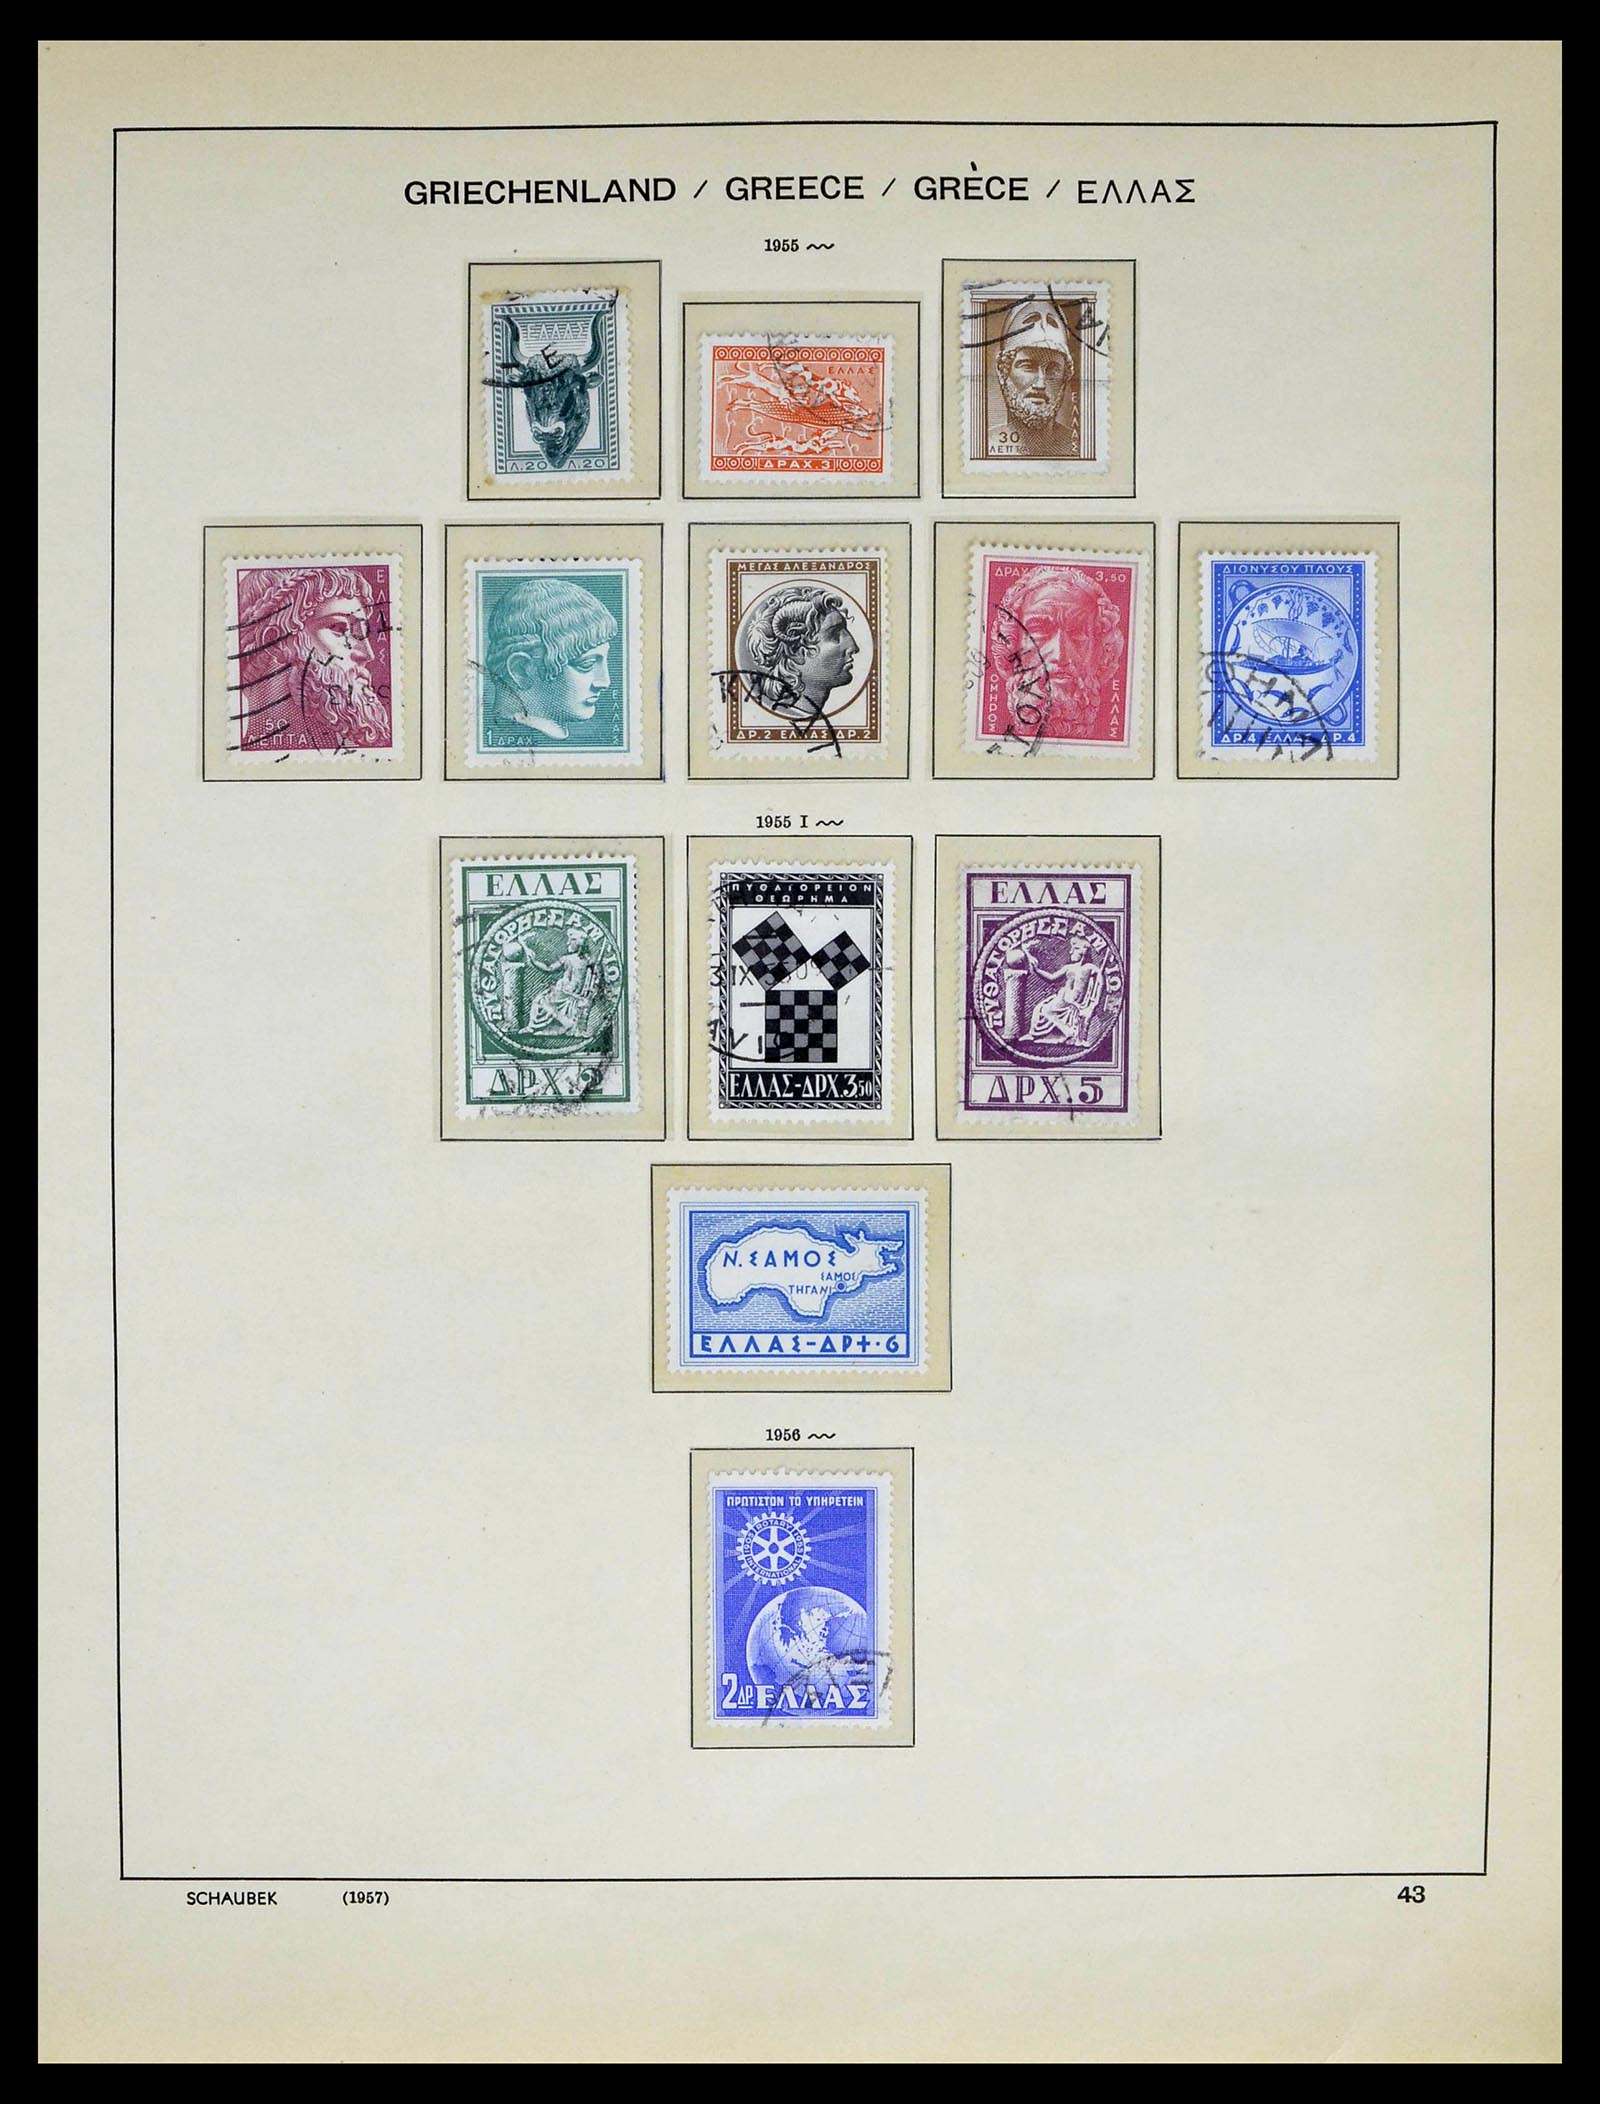 39156 0043 - Stamp collection 39156 Greece 1861-1996.